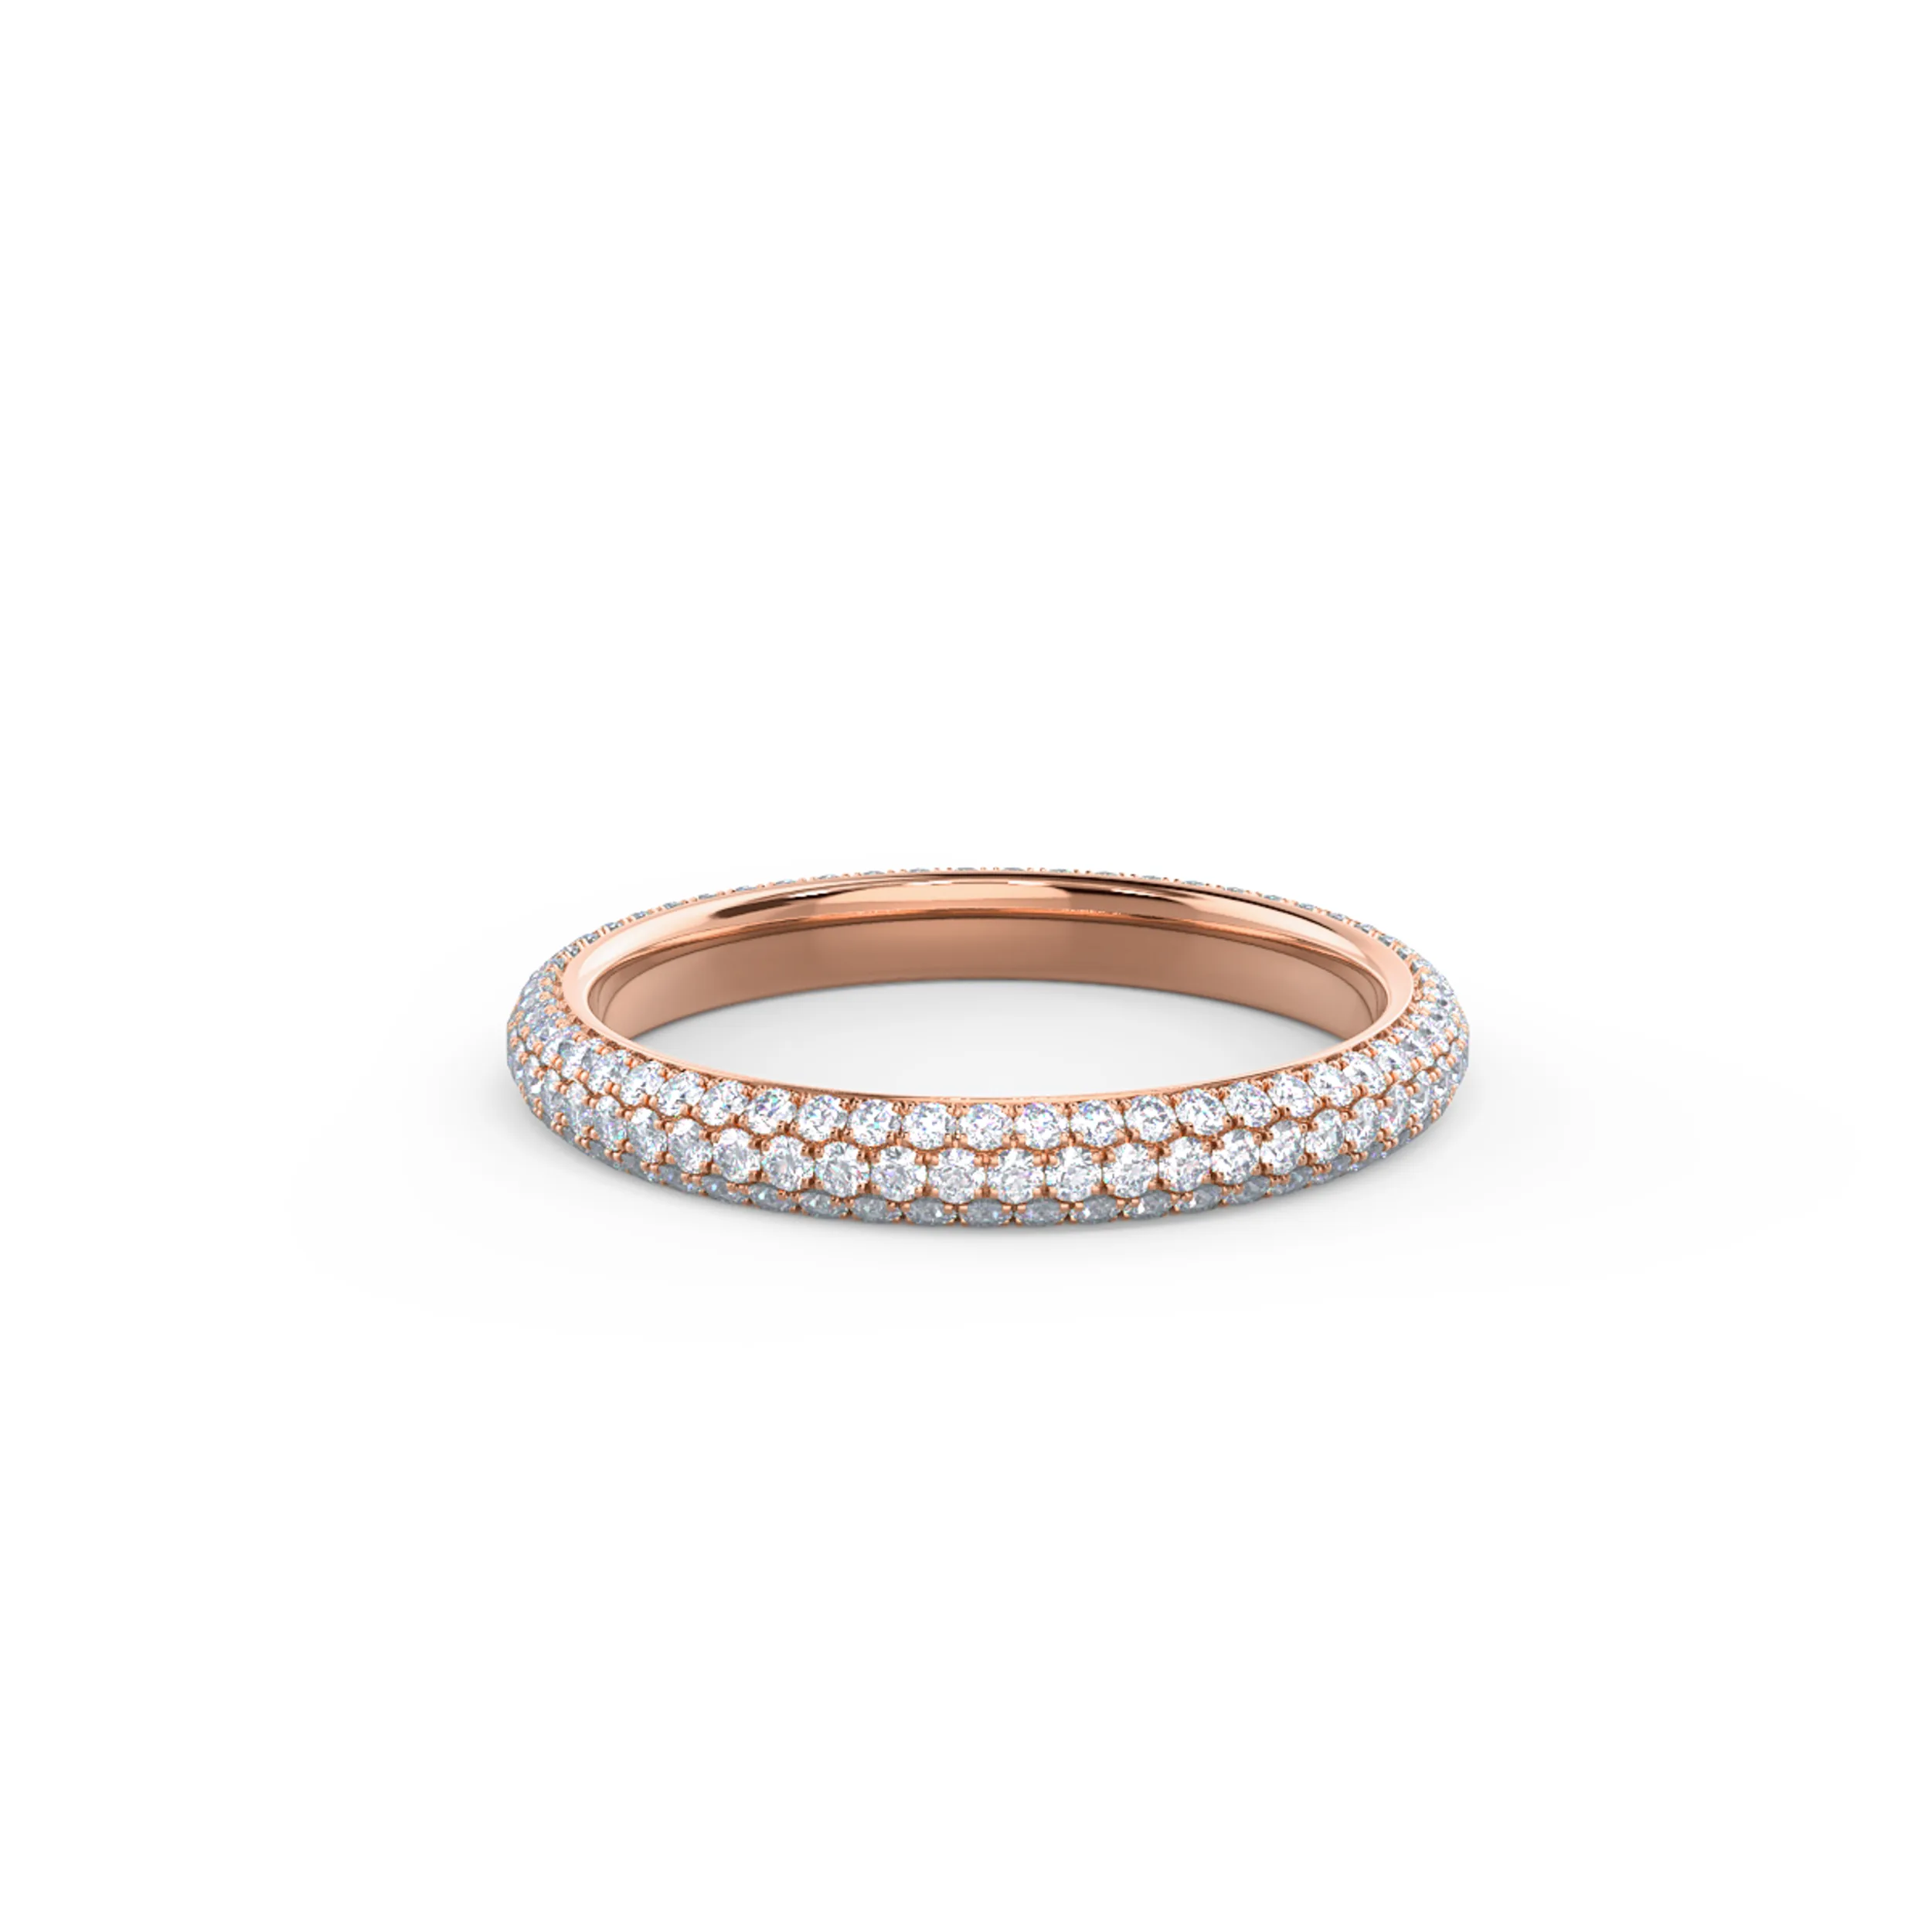 Hand Selected 0.8 ct Round Lab Diamonds Three Sided Pavé Eternity Band in 14k Rose Gold (Main View)